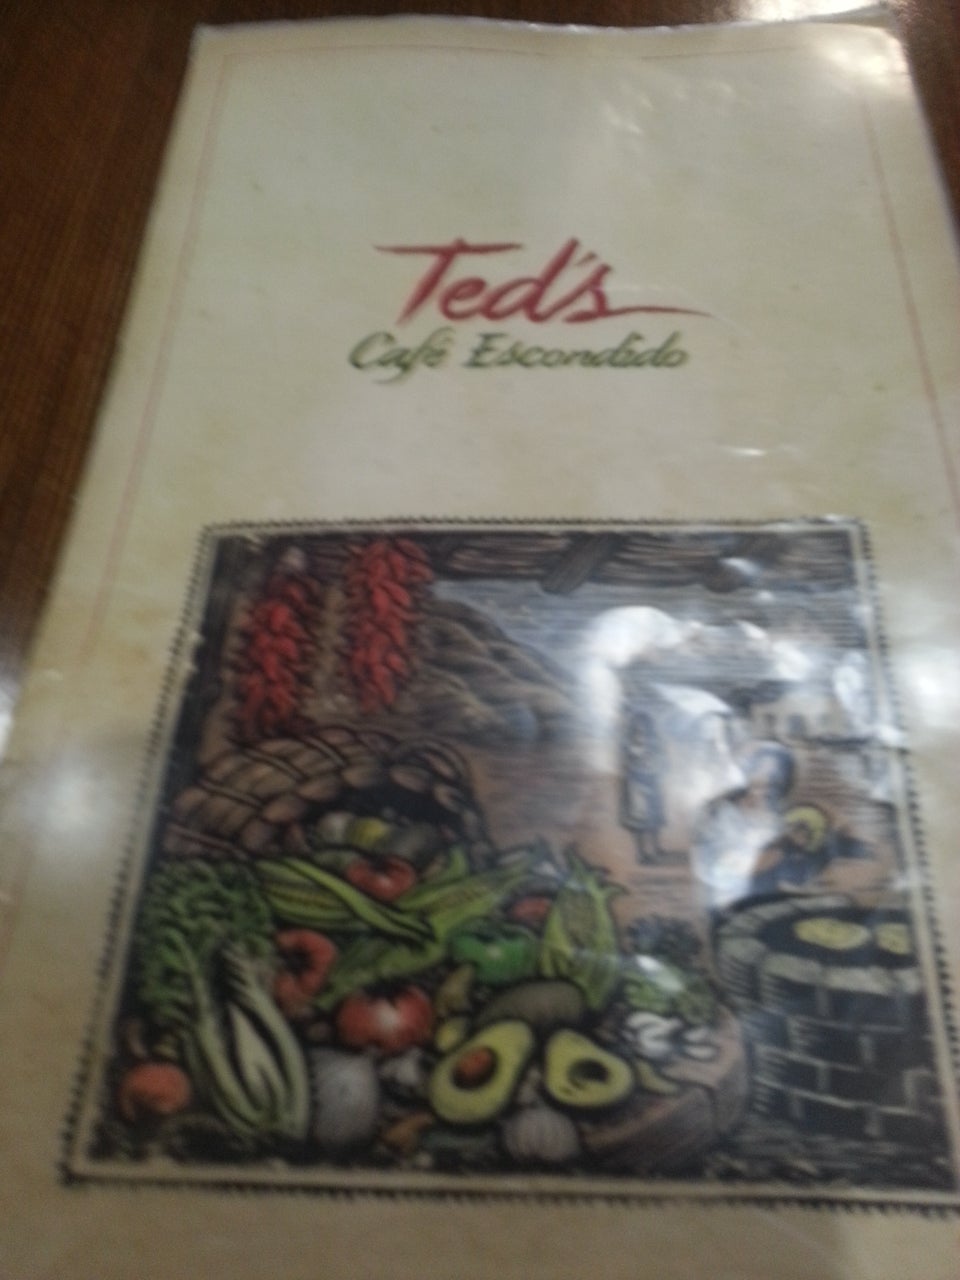 Photo of Ted's Cafe Escondido